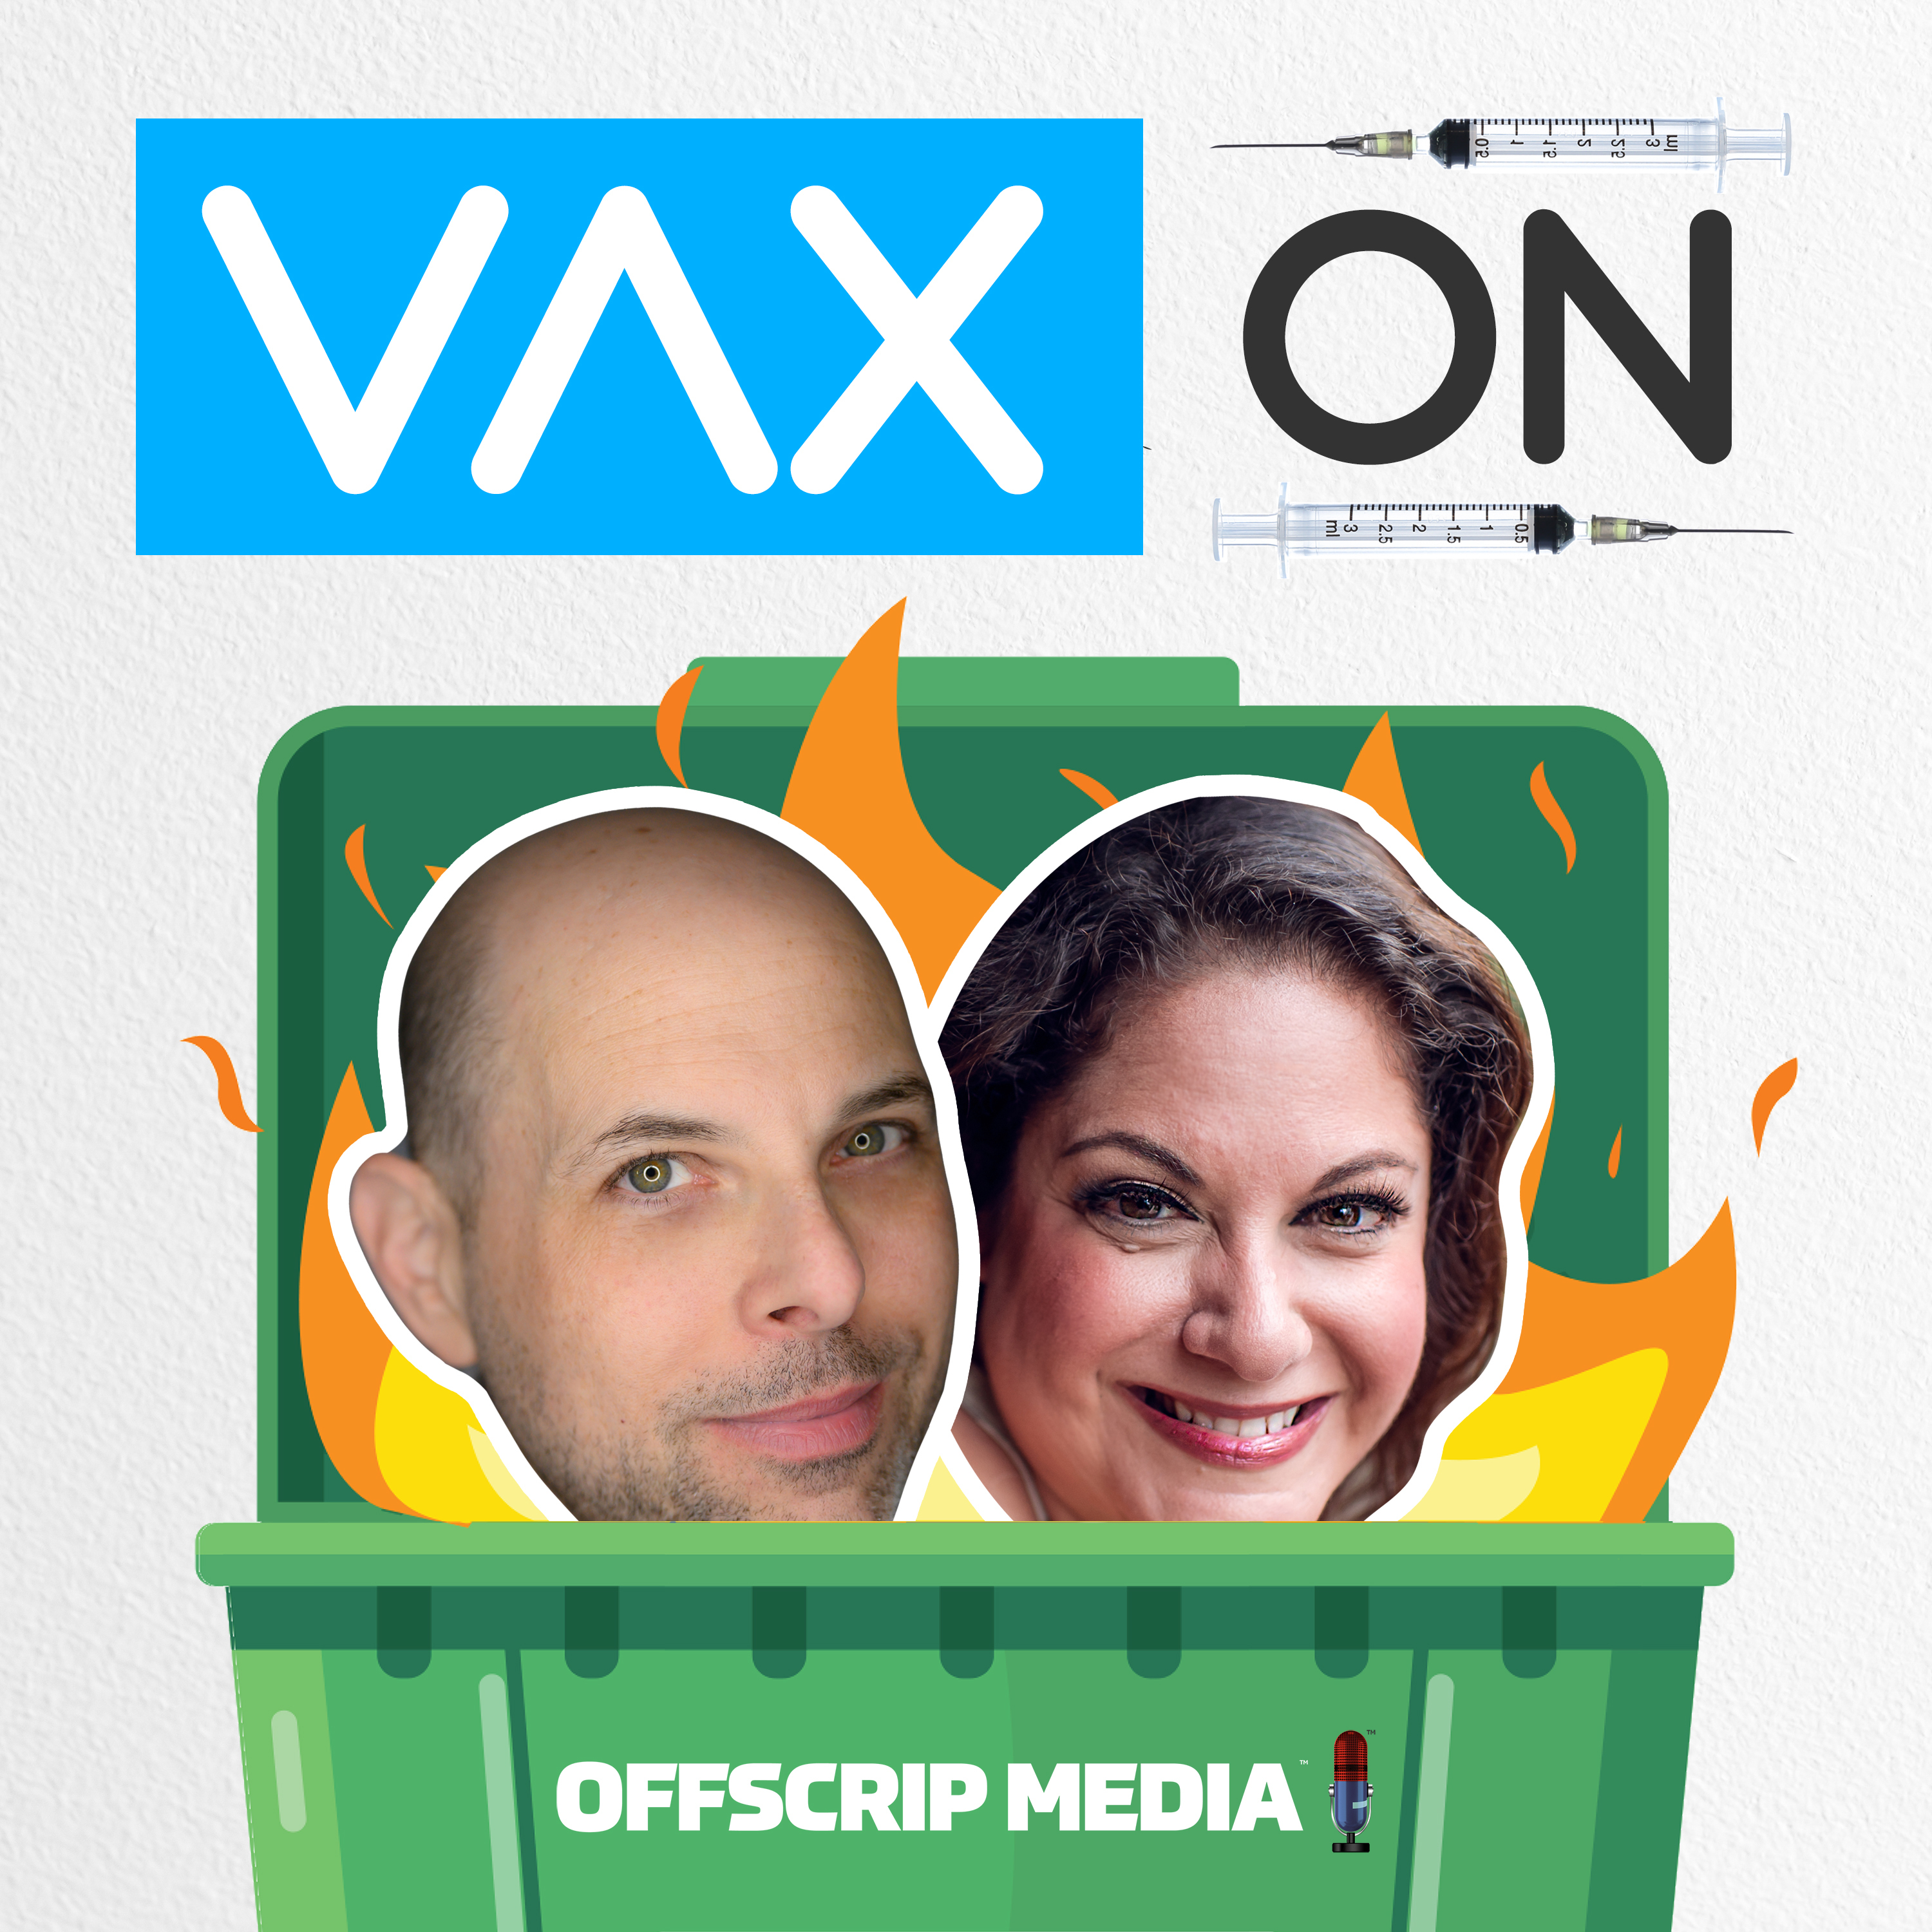 VAX ON: New Delta, New Jobs, the Olympics, and a Luca Review